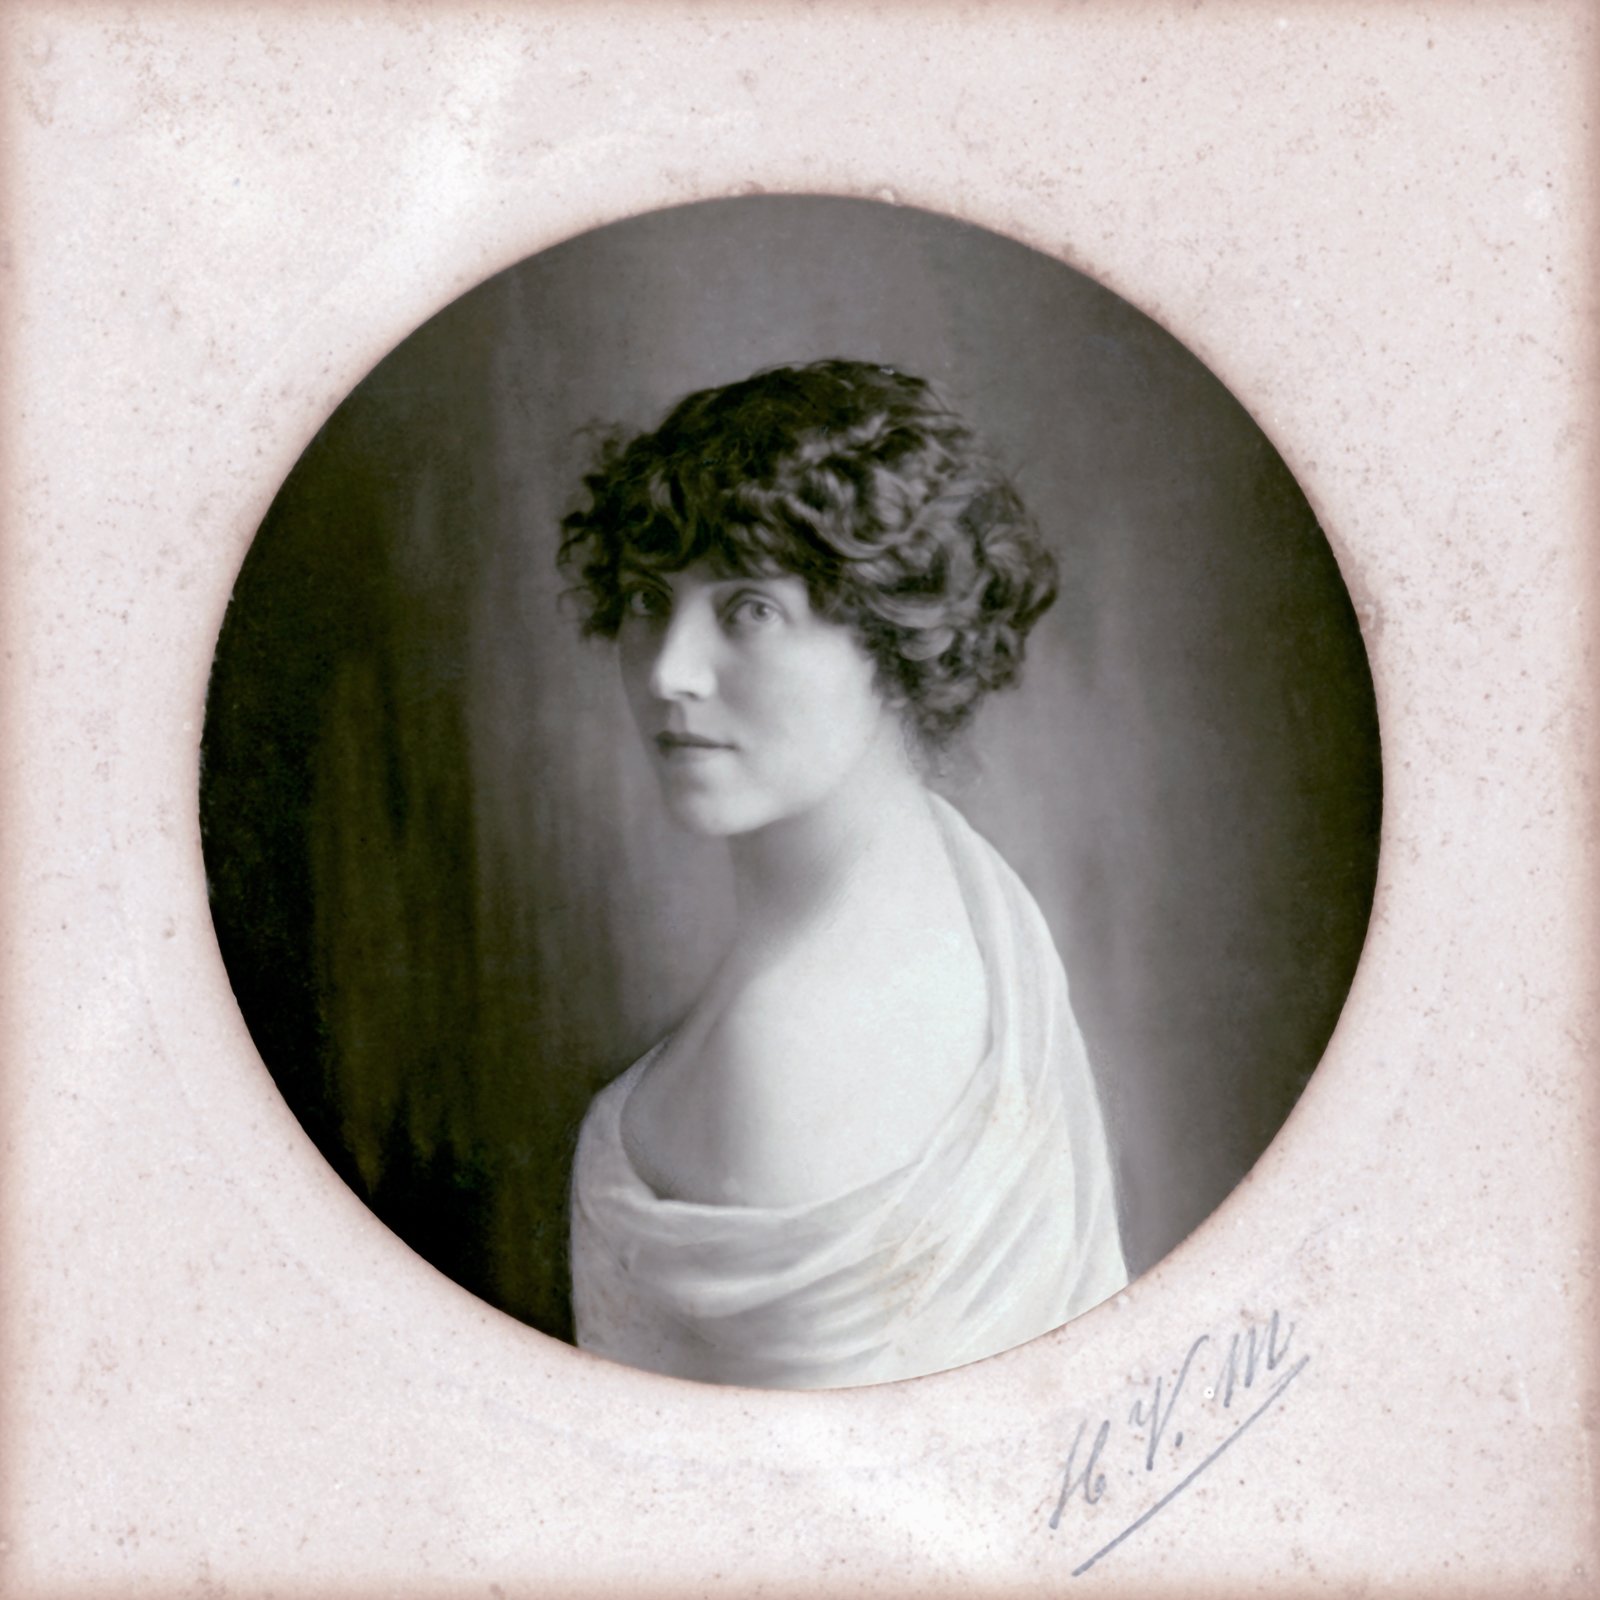 My grandmother, Annie Walsh, from a Paris photo studio, c. 1913.